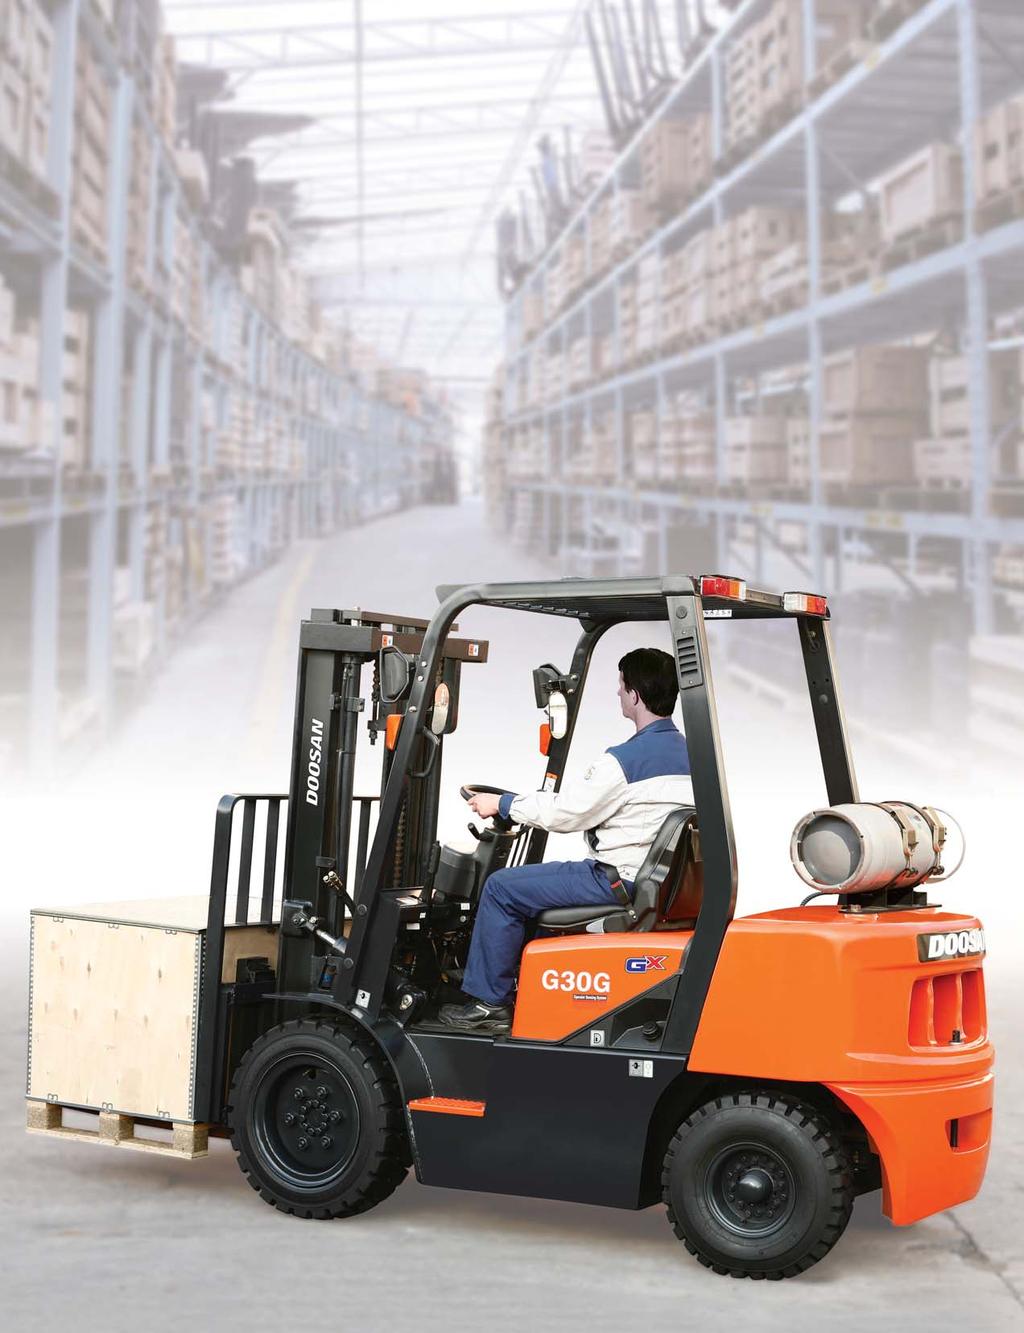 Proven Quality, Responsive Service and A Reliable Partner... After sales servicg of Doosan forklifts is available from both the sellg dealership and Doosan s own customer service center.